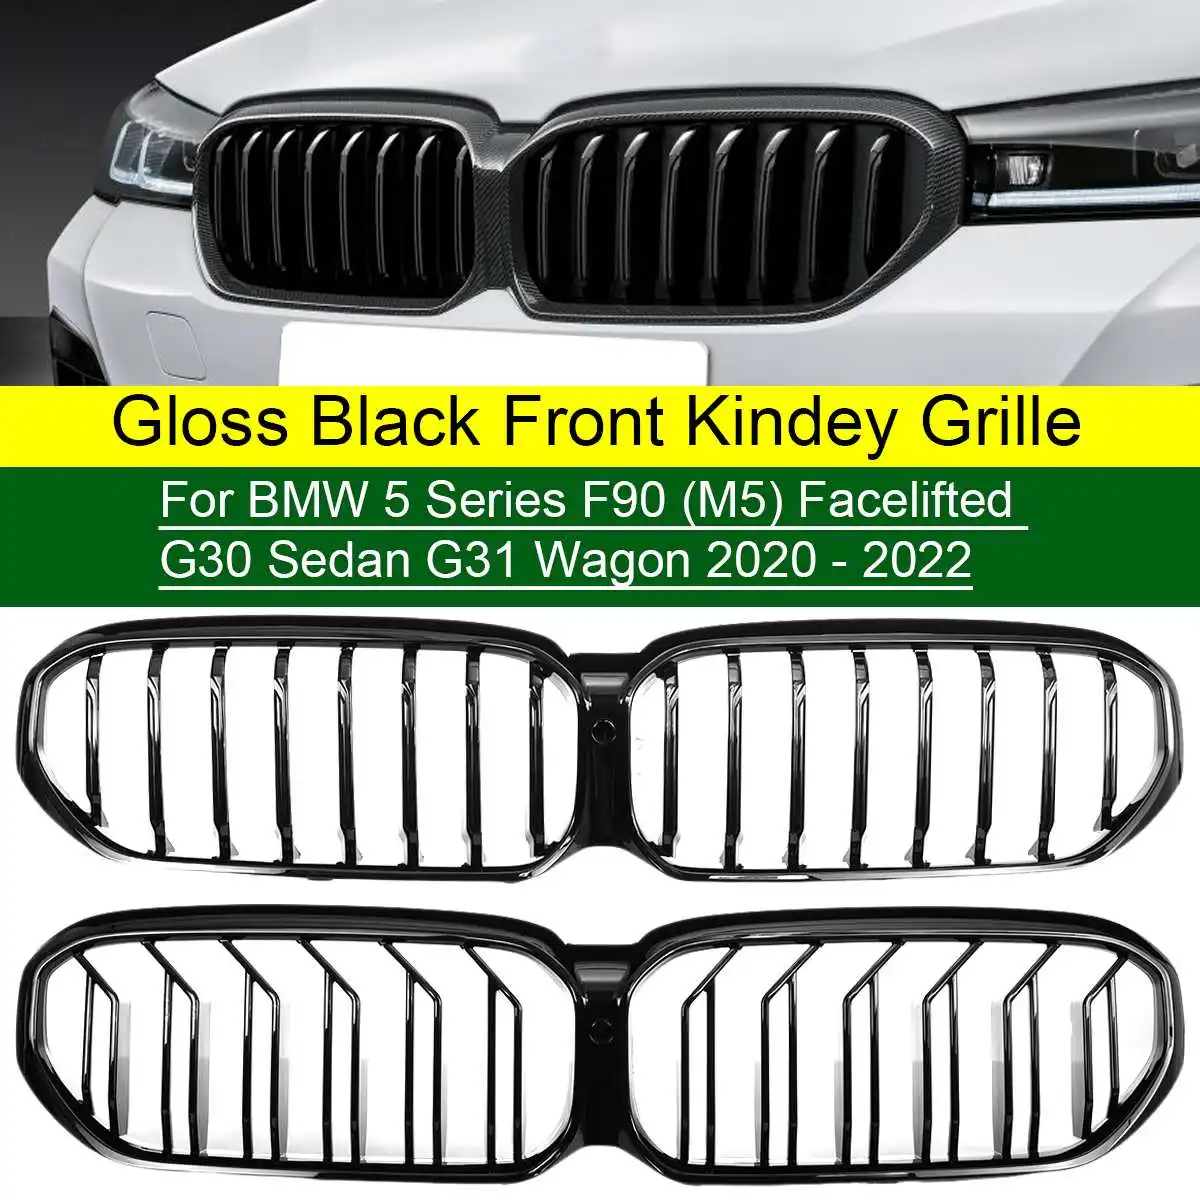 

Front Radiator Grille Hood for BMW 5 Series Facelifted G30 Sedan G31 Wagon F90 M5 2020-2022 Replace Front Bumper Kidney Grill